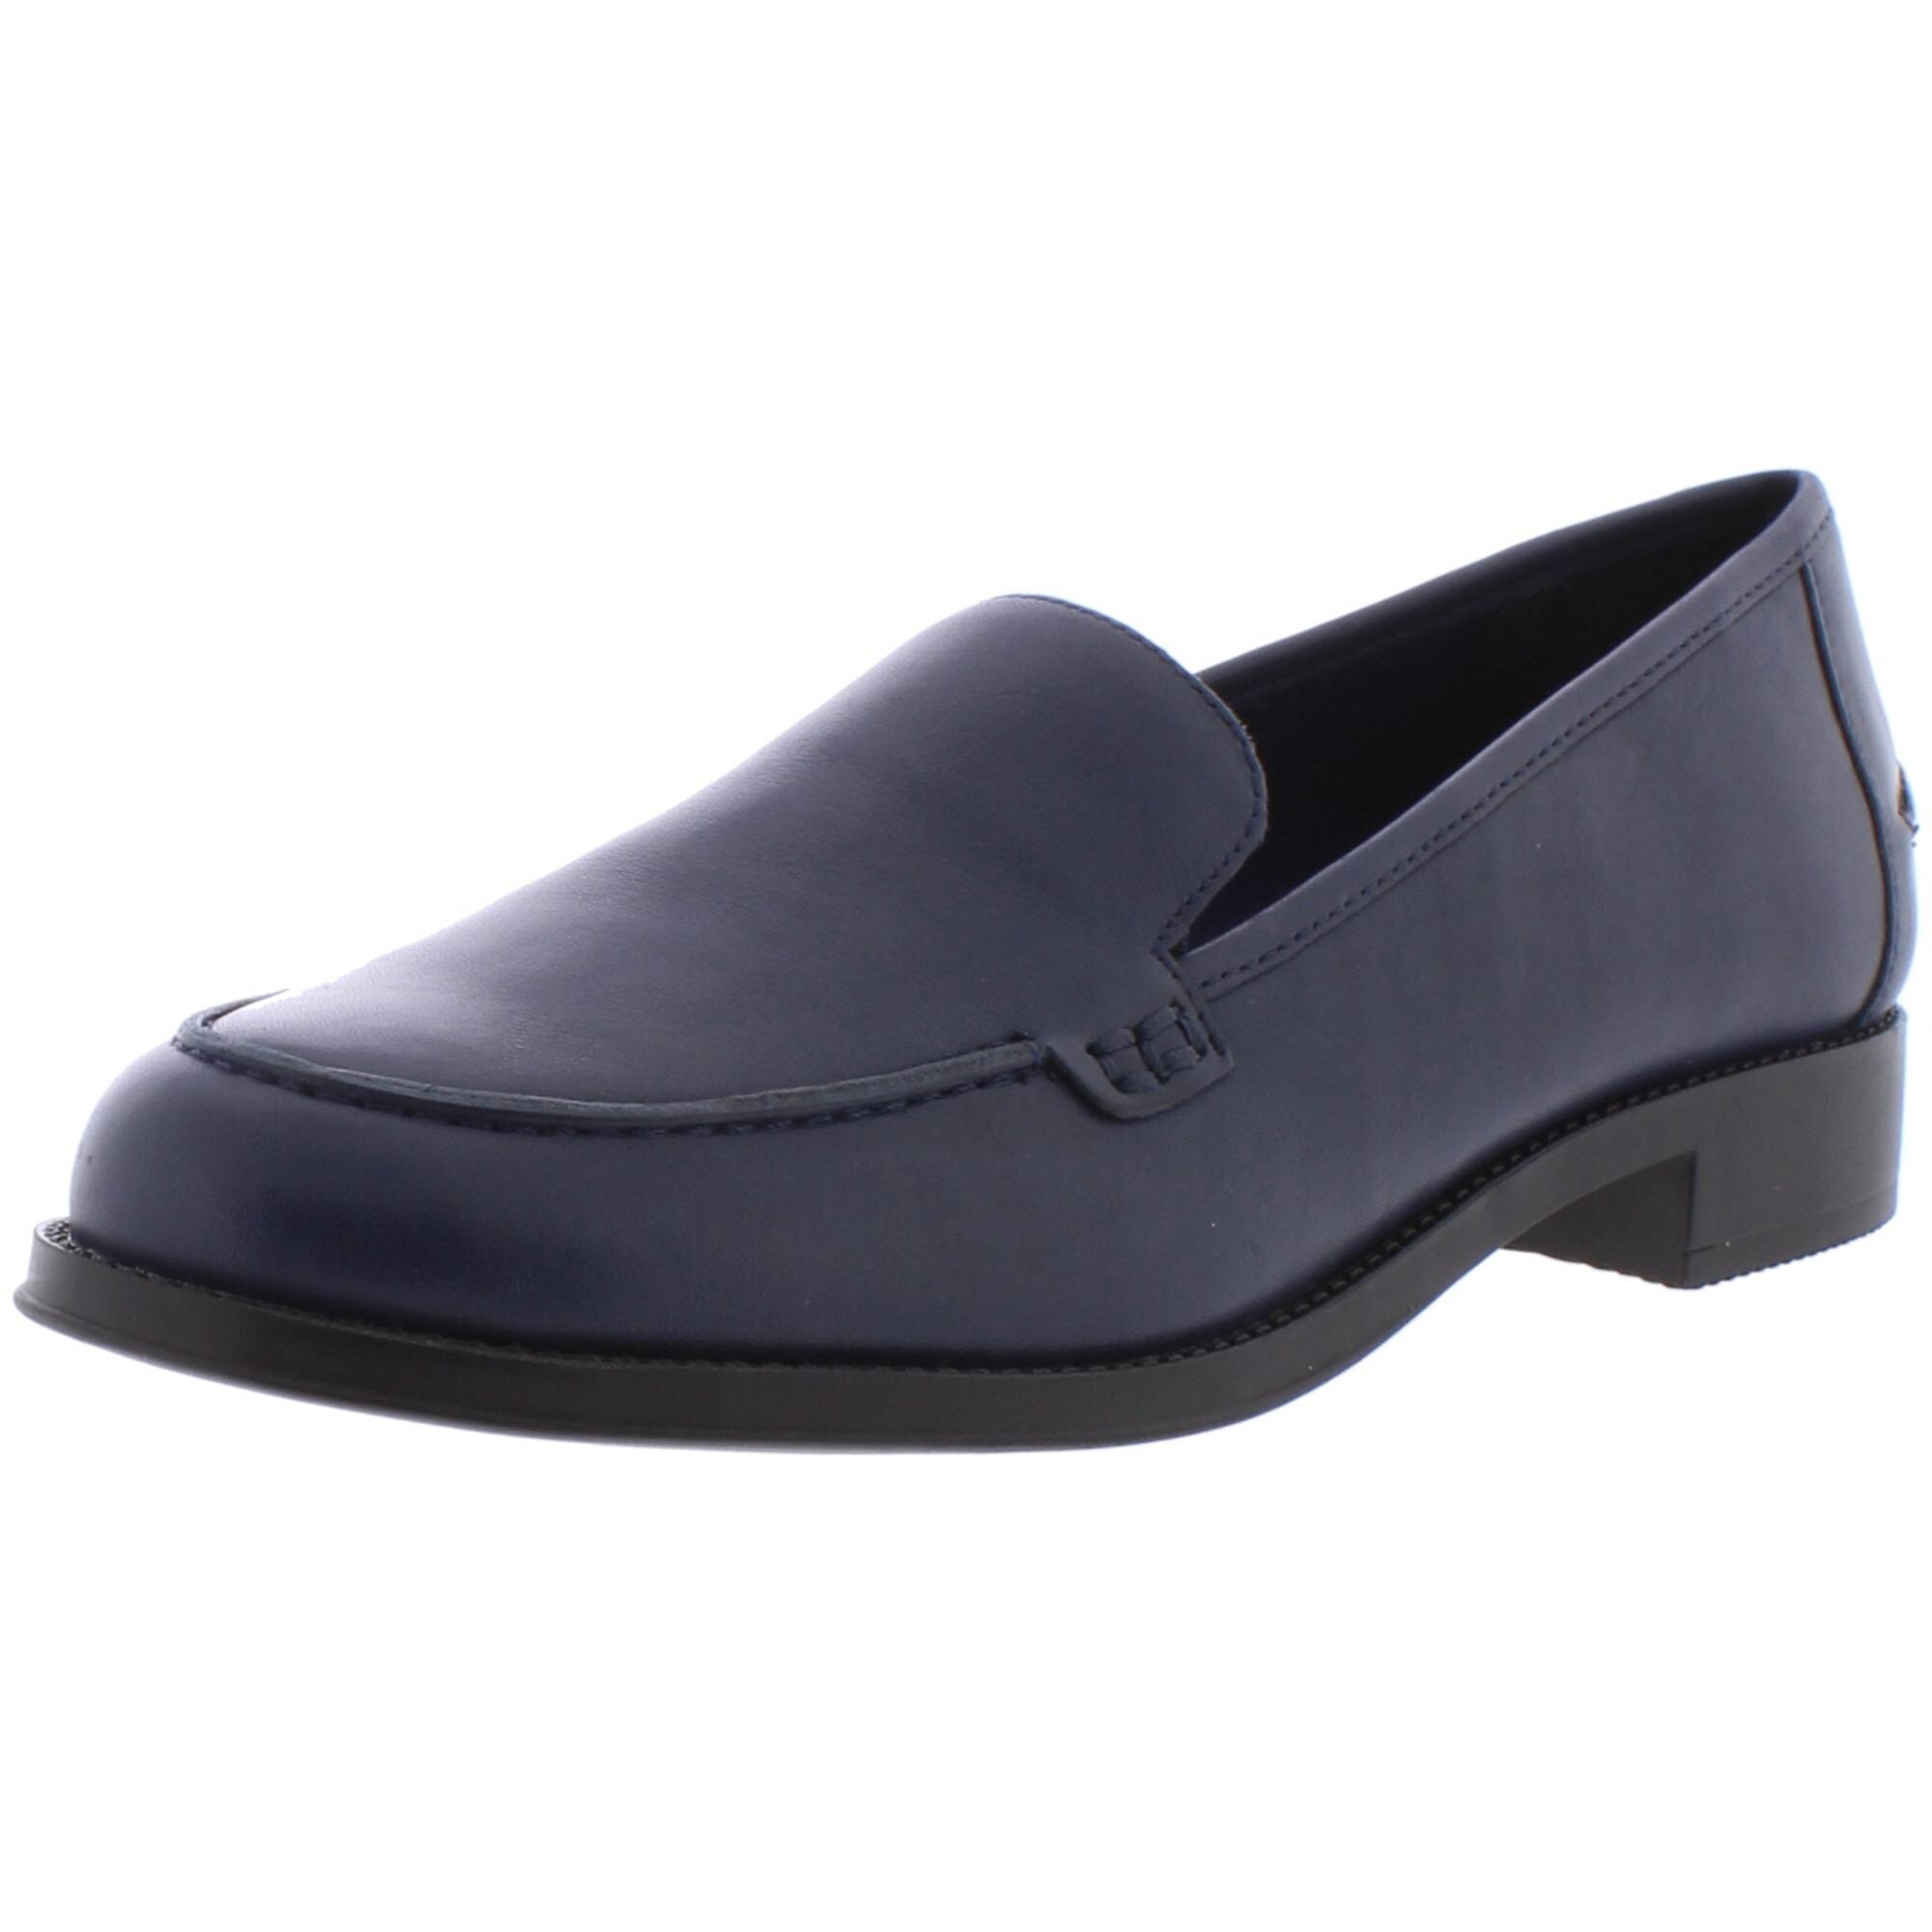 narrow loafers